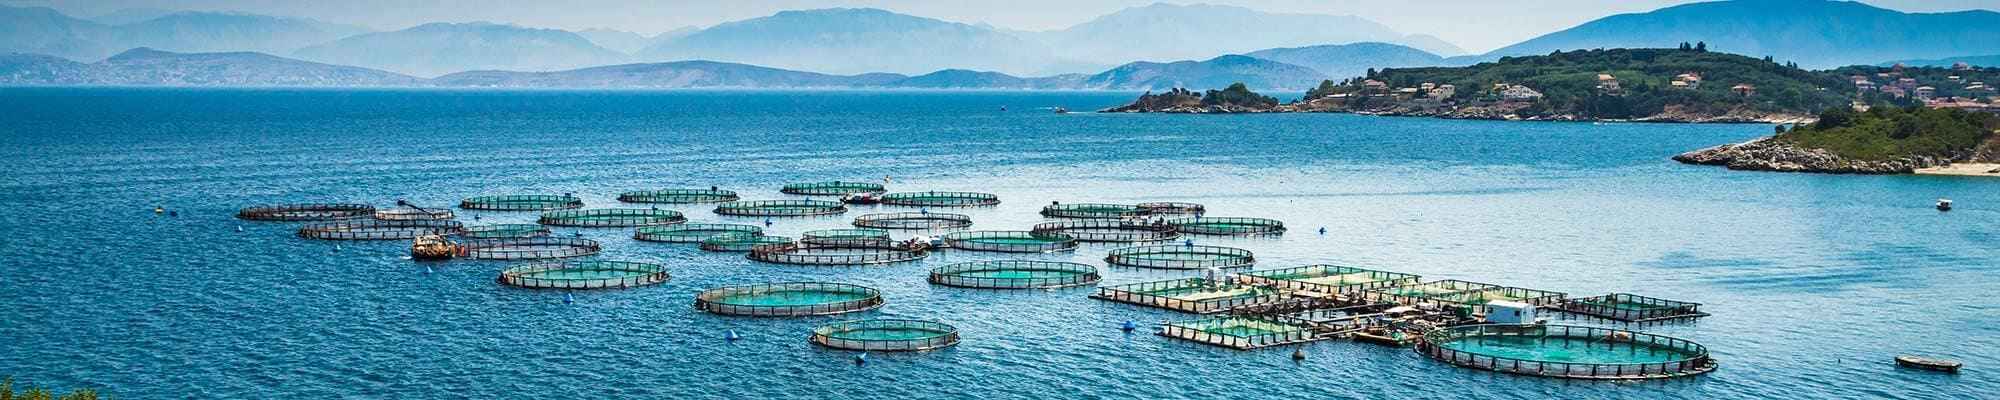 Aquaculture and fisheries